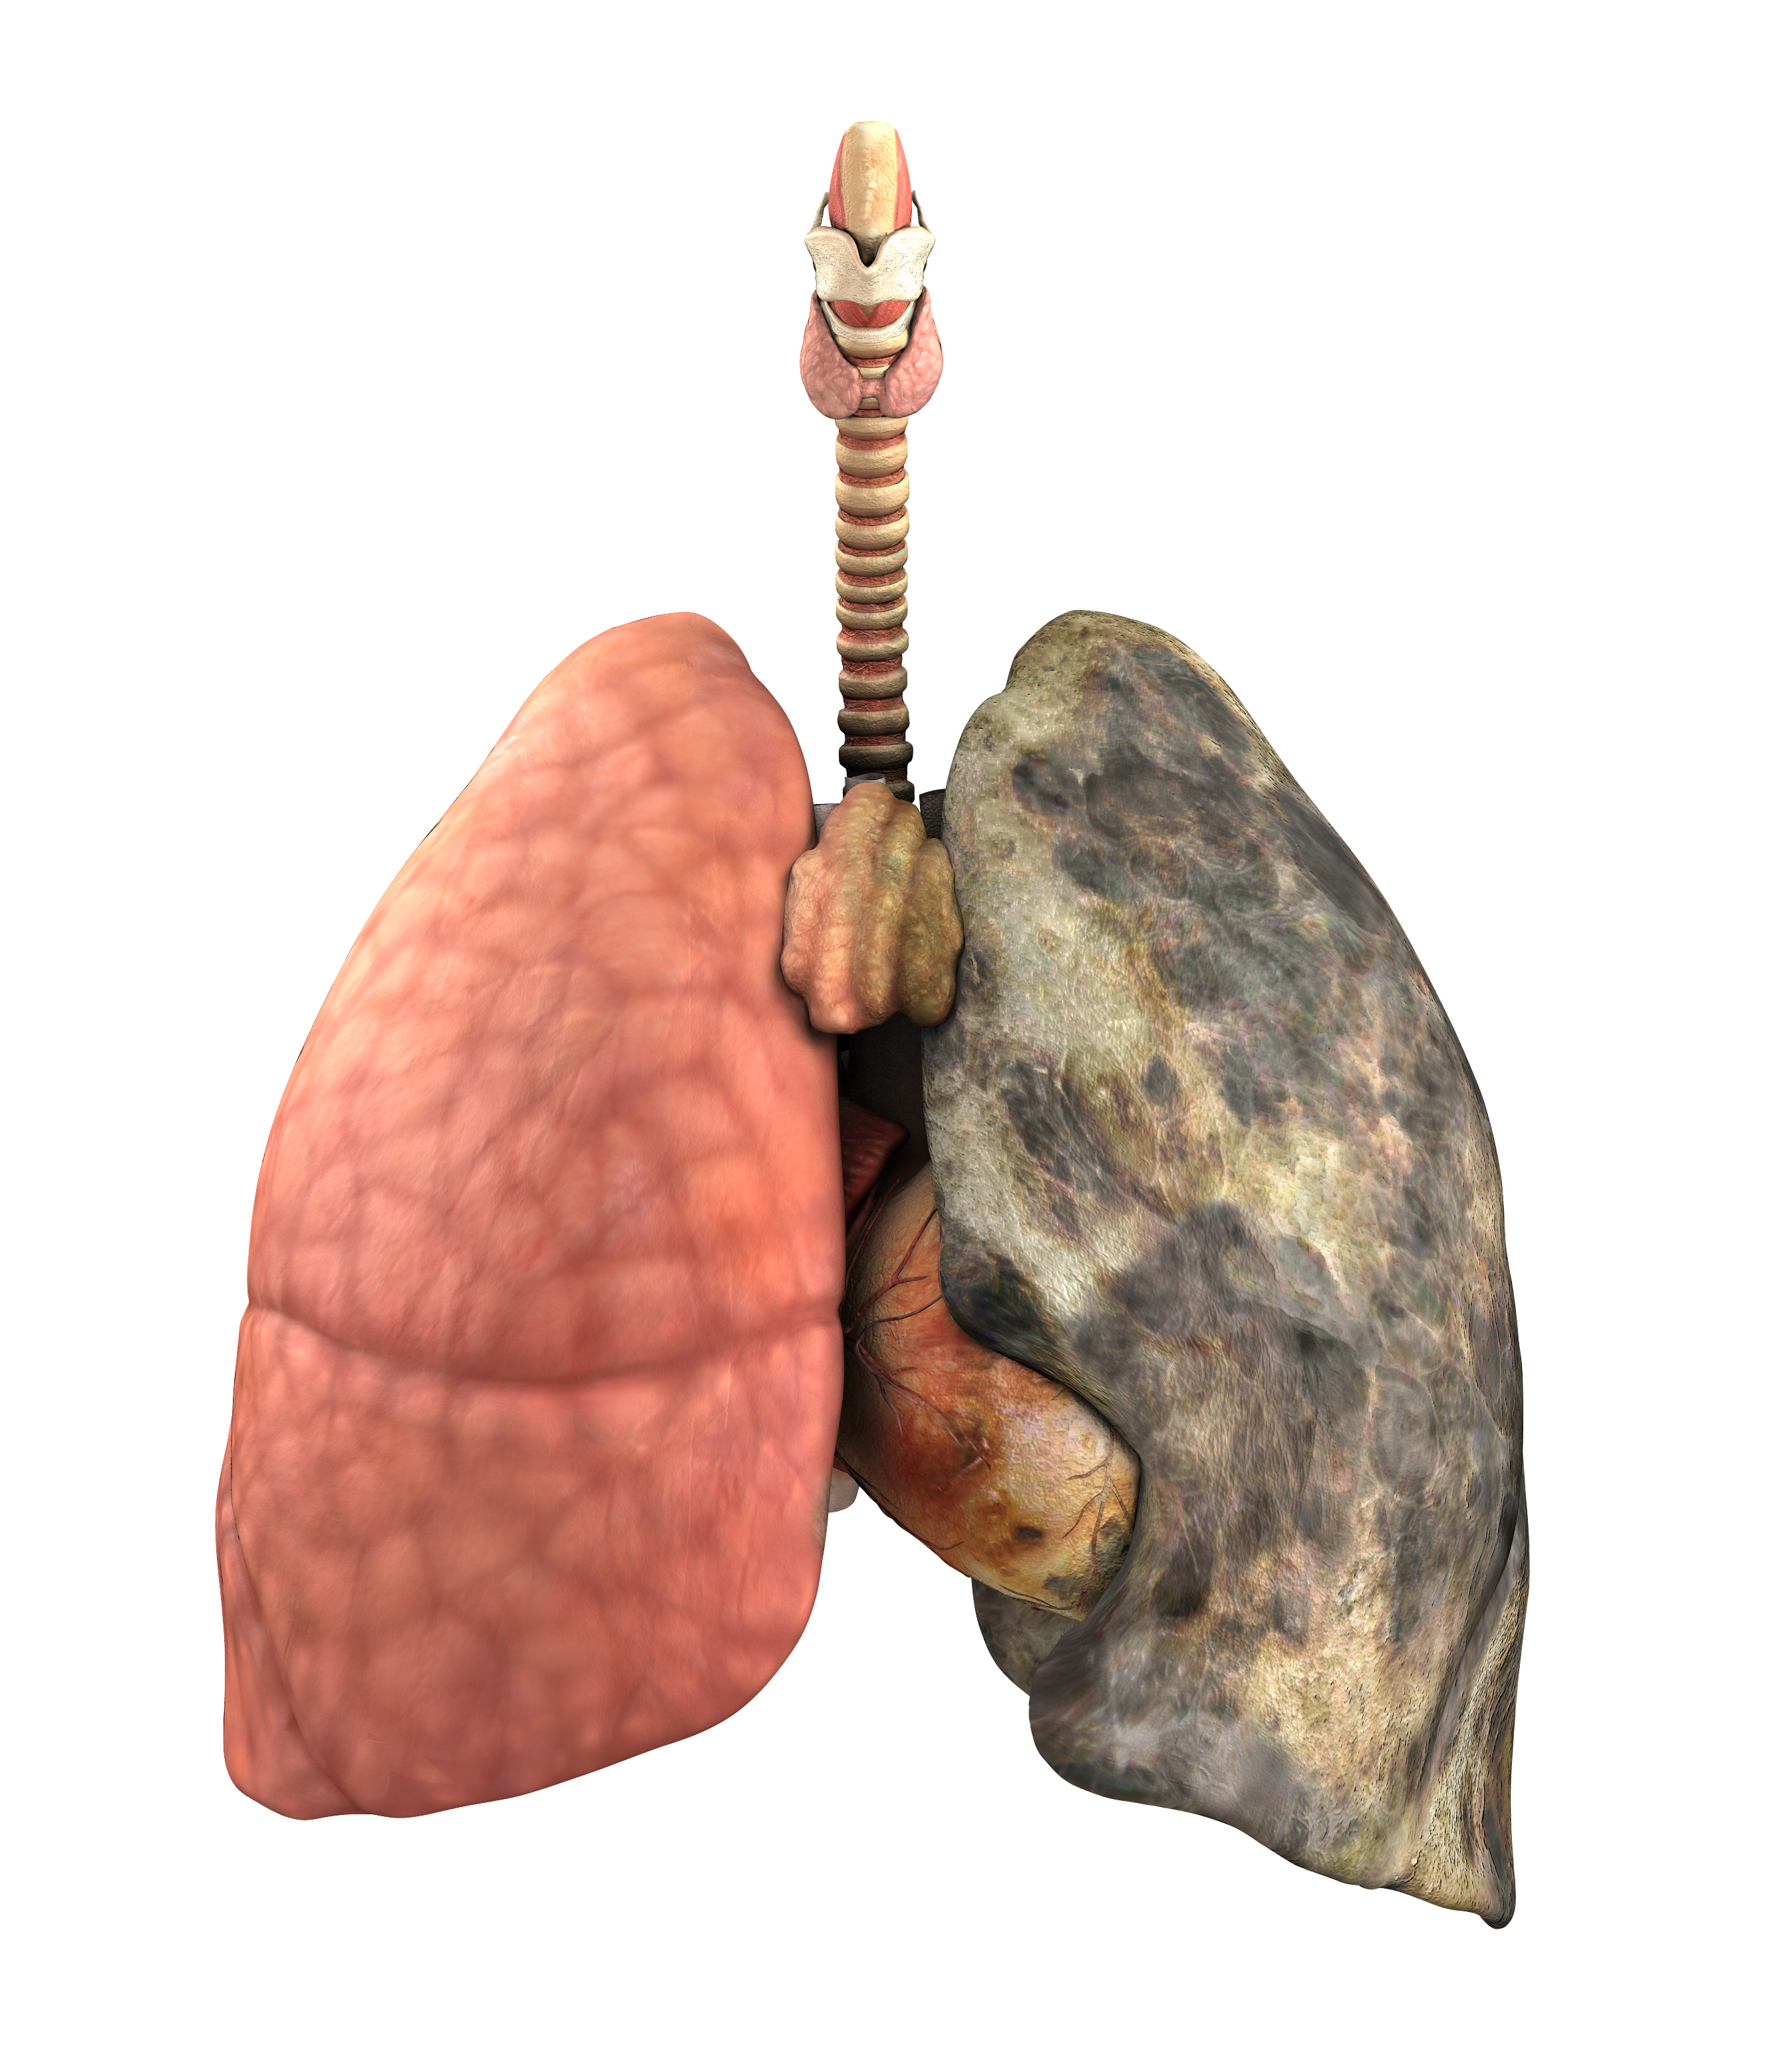 A set of lungs, before and after a lifetime of smoking - 3d render.